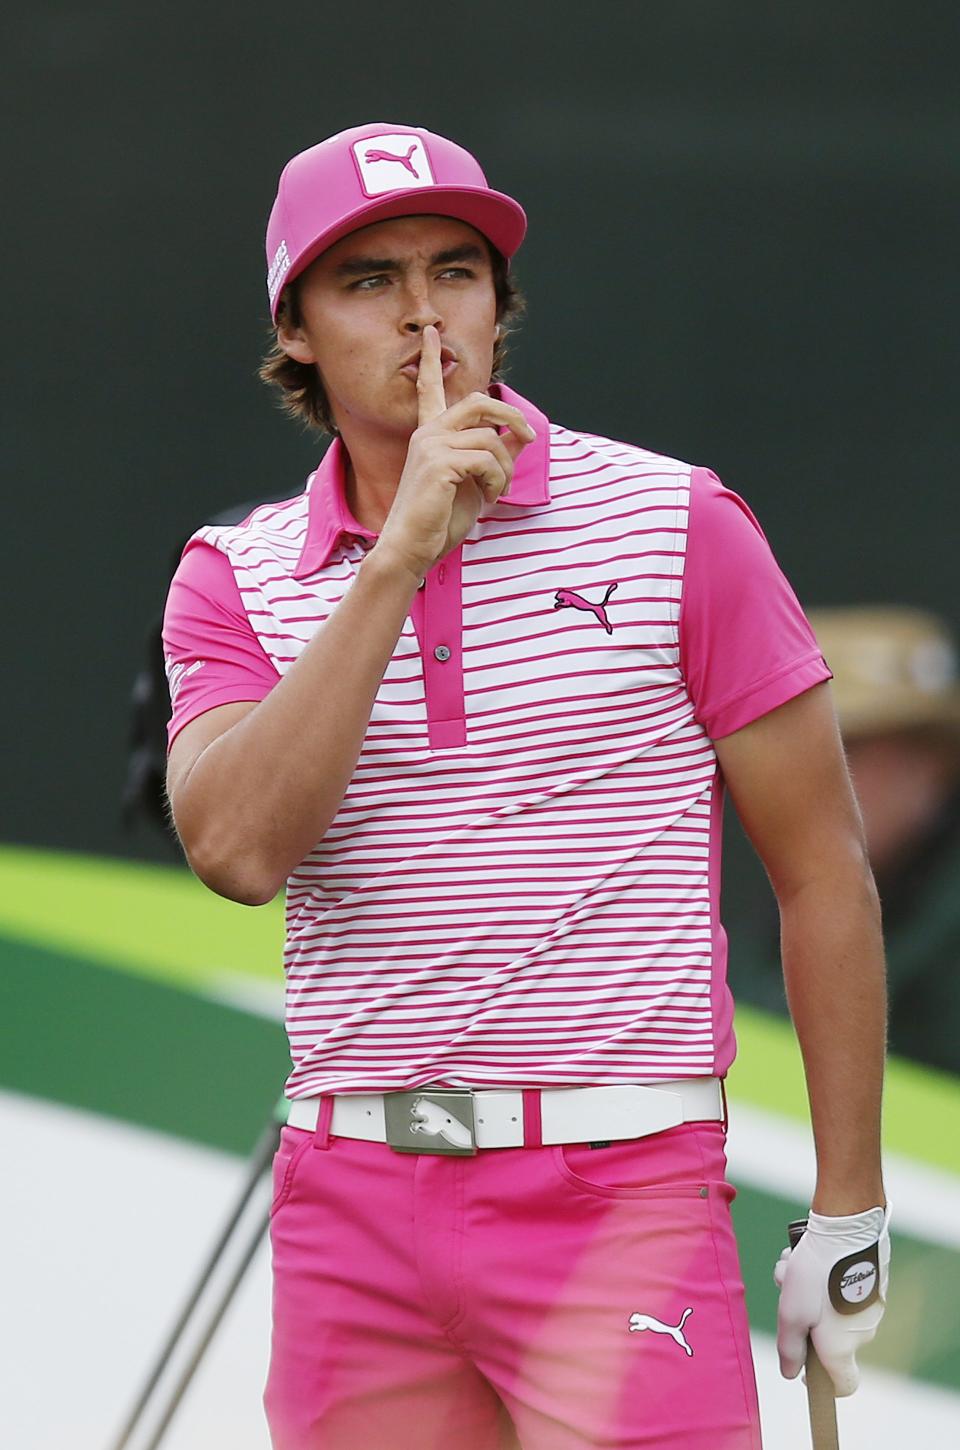 Rickie Fowler teases the crowd to be quiet as he steps onto the 16th tee box during the second round of the Phoenix Open golf tournament on Friday, Jan. 31, 2014, in Scottsdale, Ariz. (AP Photo/Ross D. Franklin)